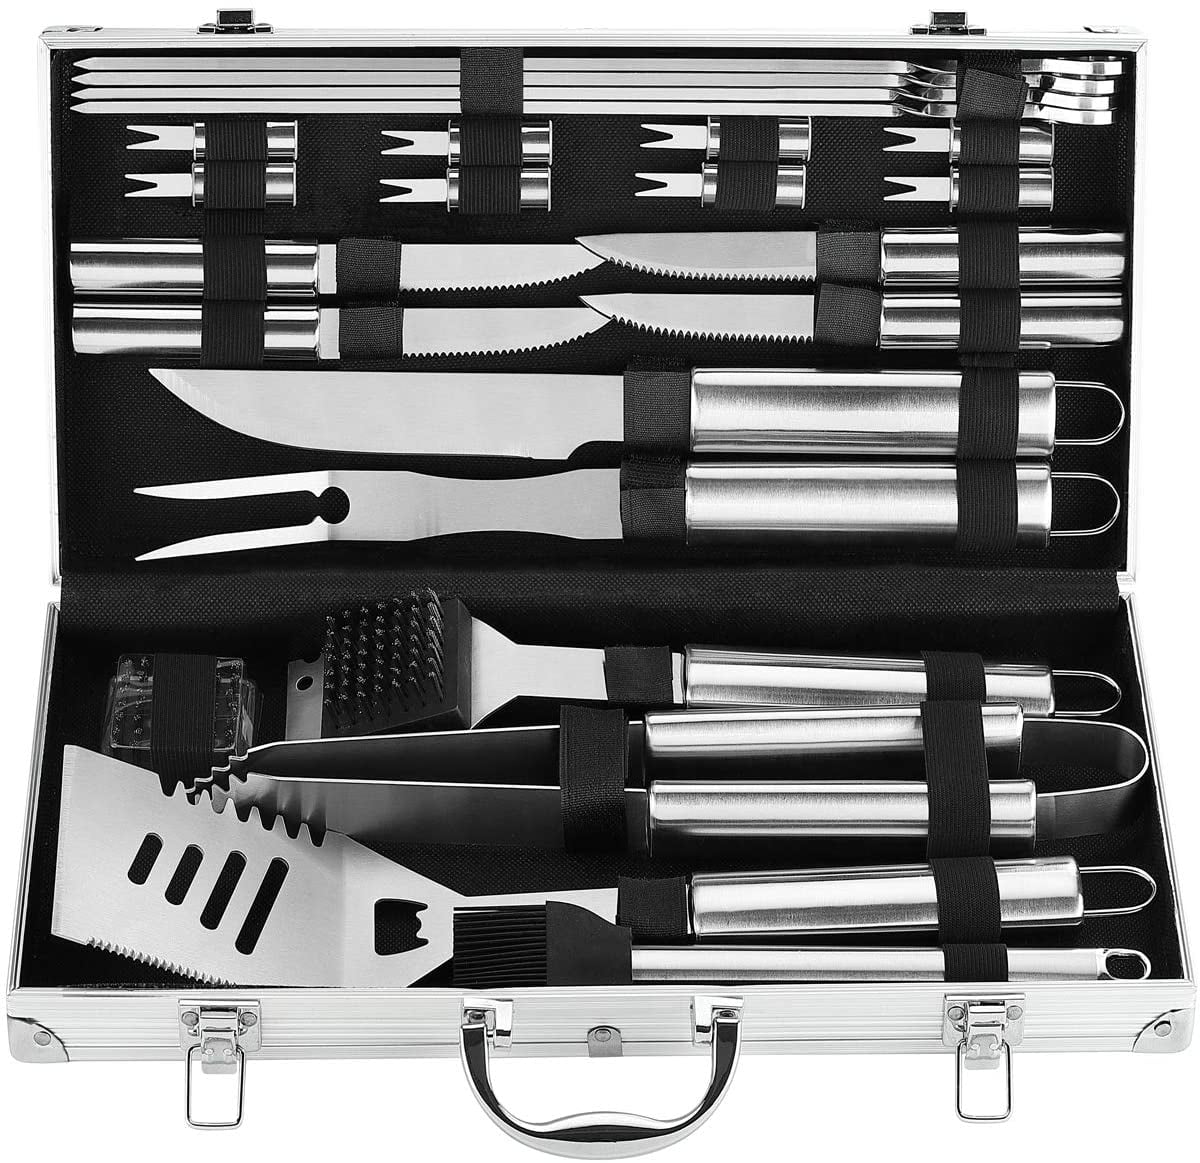 BBQ Tools Set Stainless Steel Barbecue Heavy Duty Grill Accessories Kit with Portable Case for Men Women for Outdoor Camping Backyard Grill Barbecue Tools Set